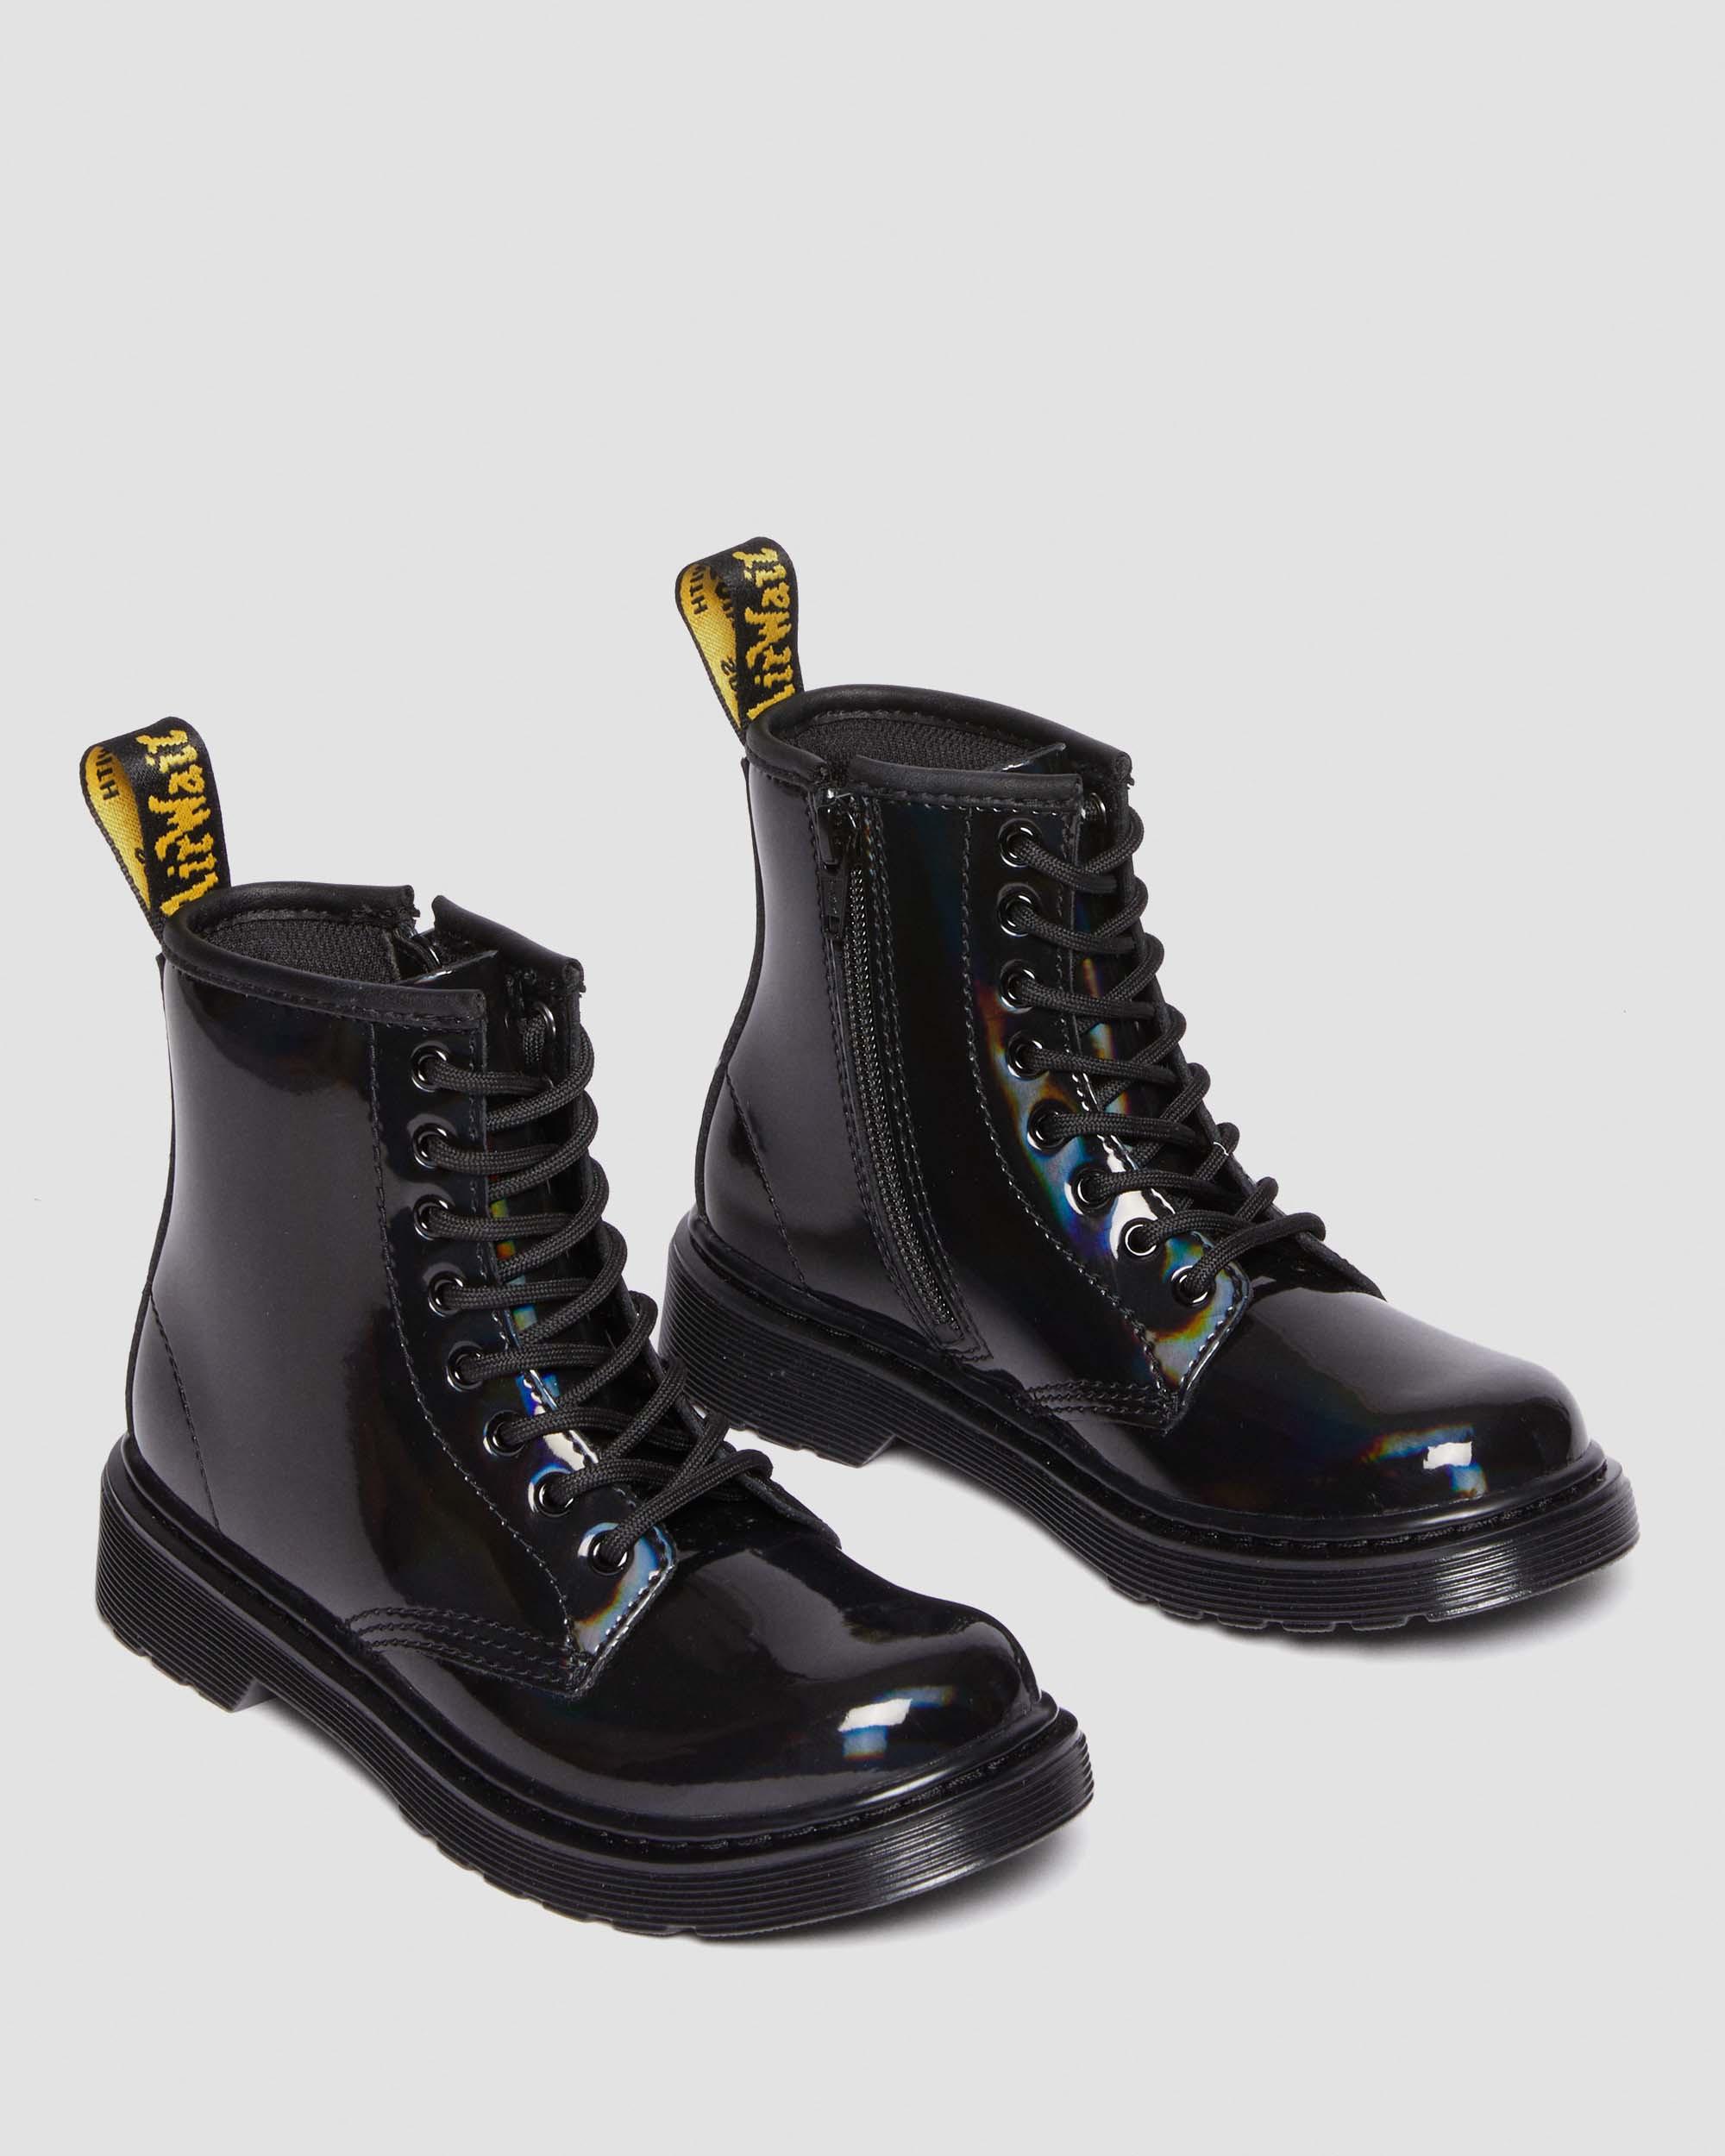 Junior 1460 Rainbow Leather Lace Up Boots in Black